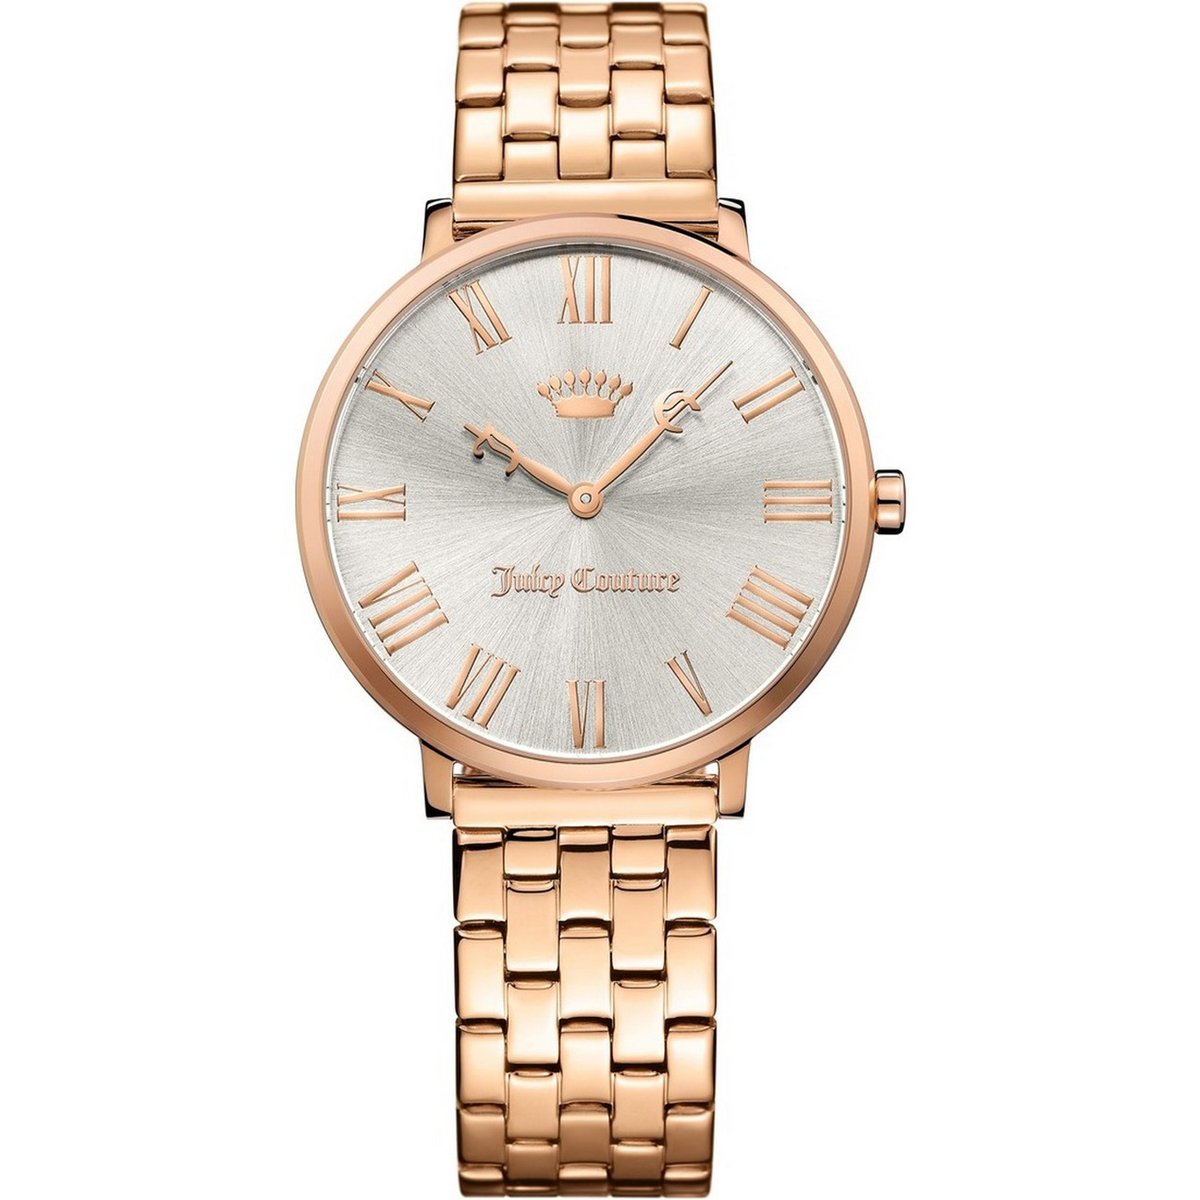 Juicy Couture Women's Analog Watch 1901634